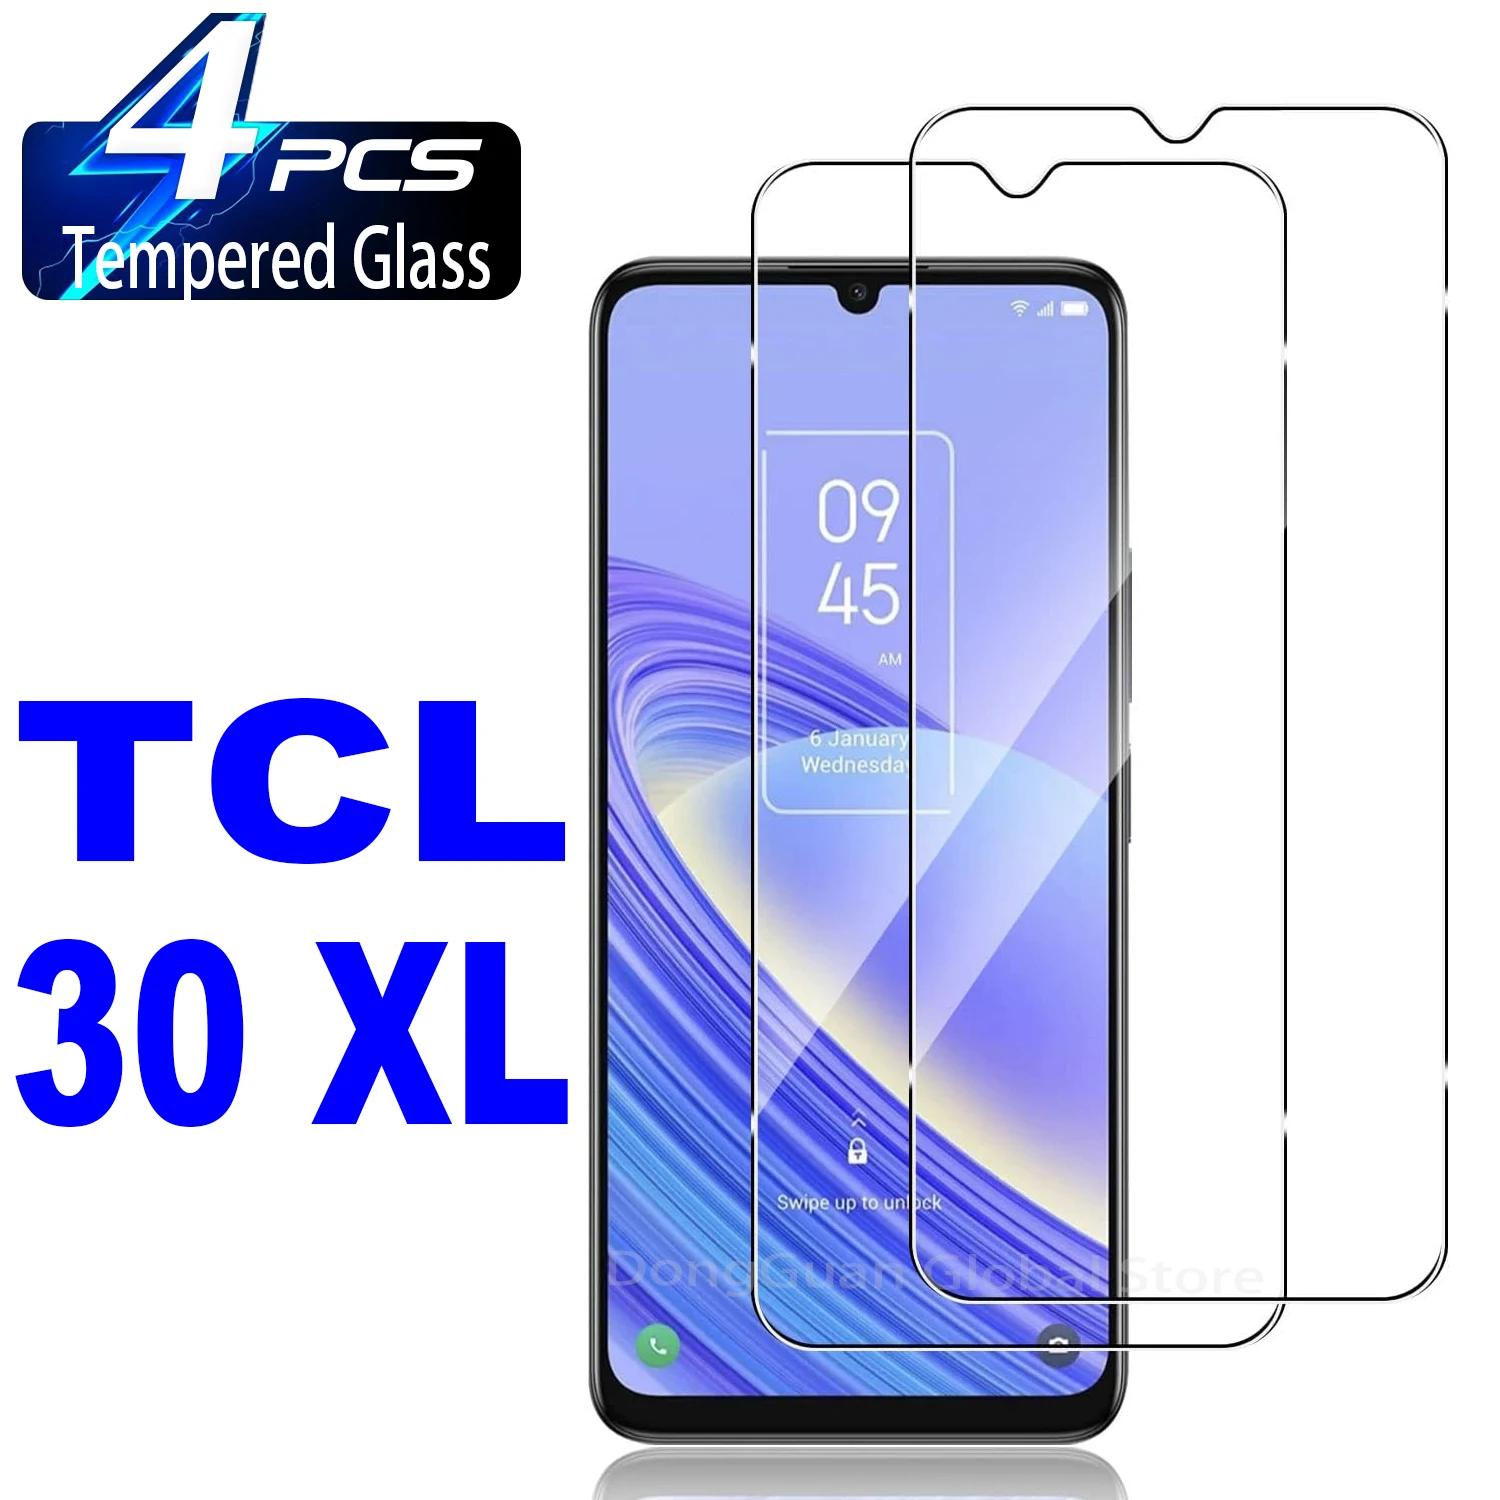 2/4Pcs Tempered Glass For TCL 30 XL Matte Anti Spy Screen Protector Privacy Glass Film